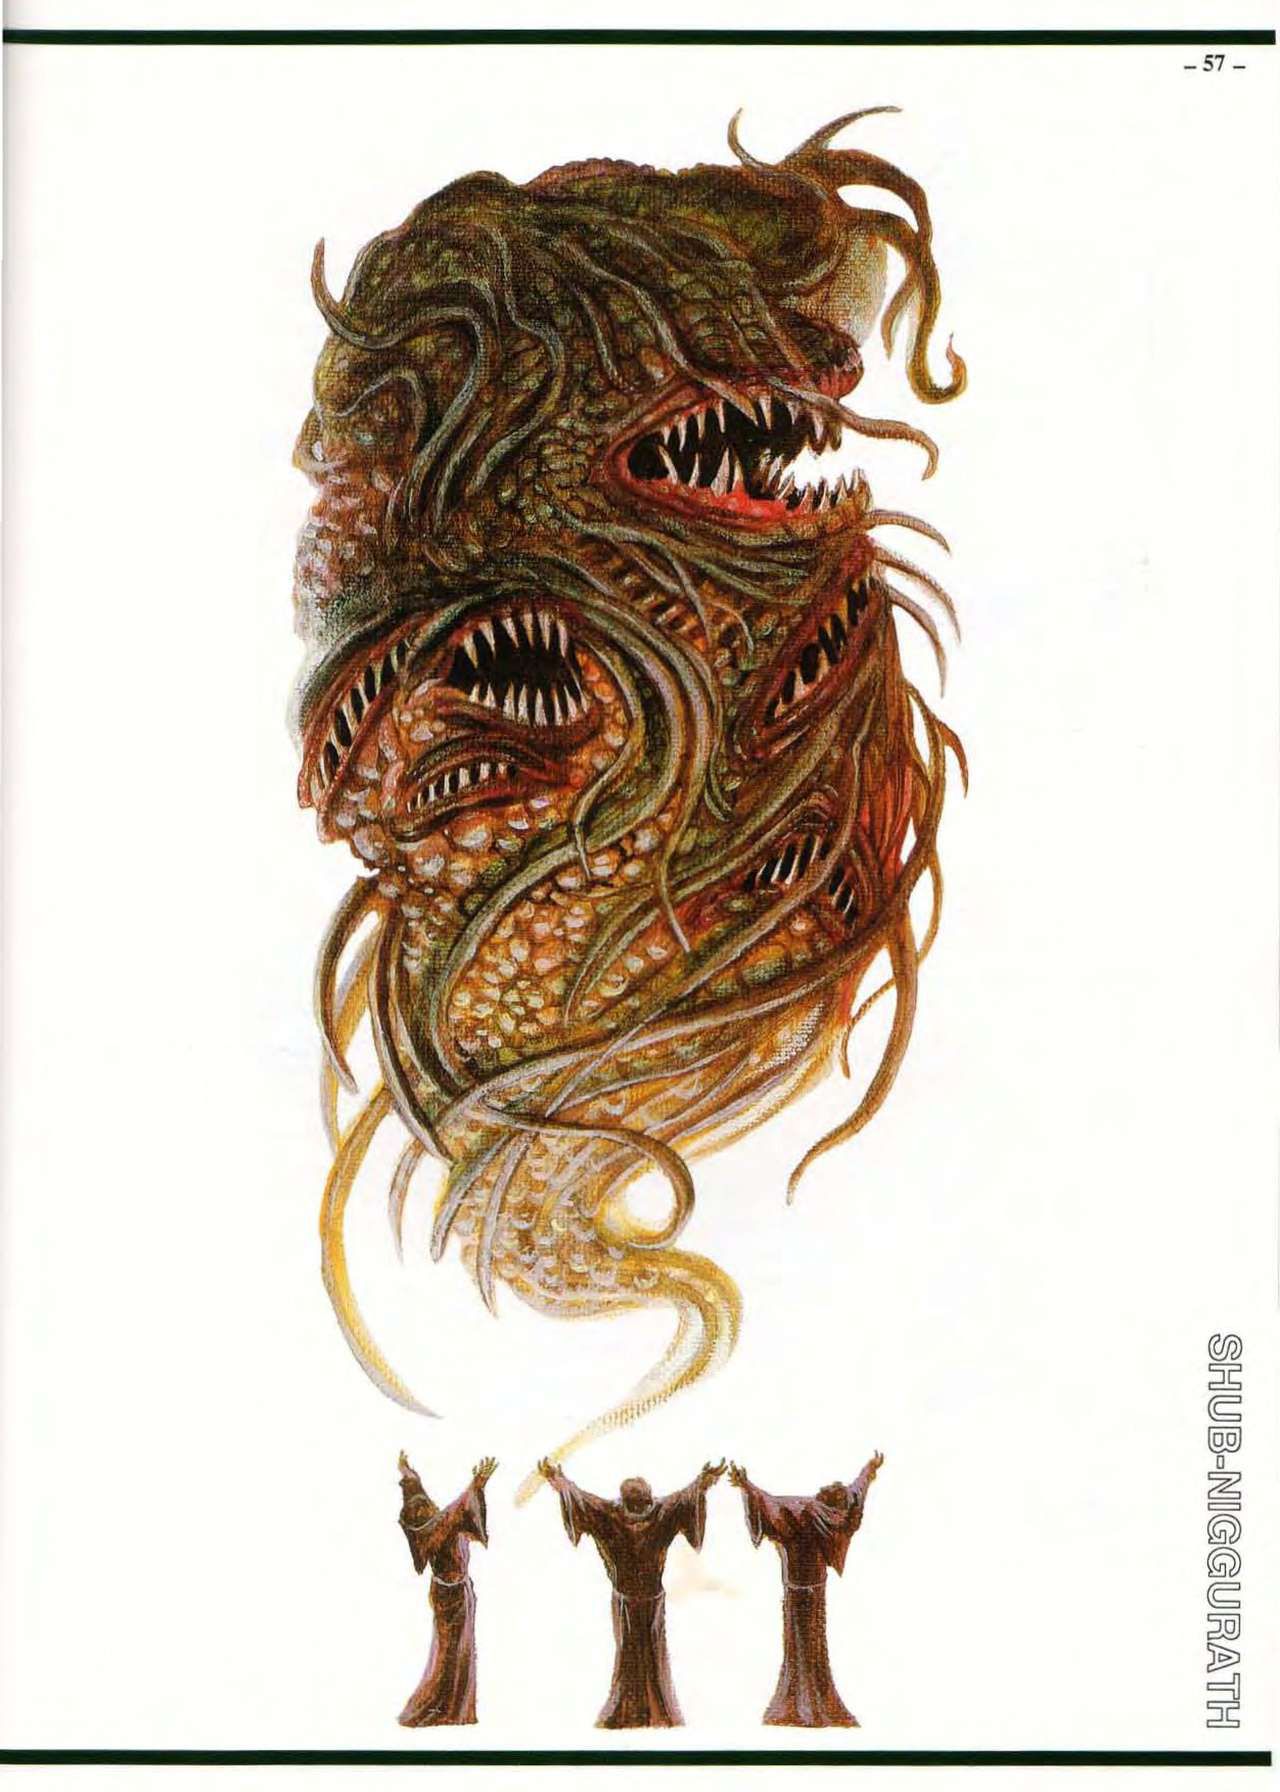 S. Petersen's Field Guide to Lovecraftian Horrors 57